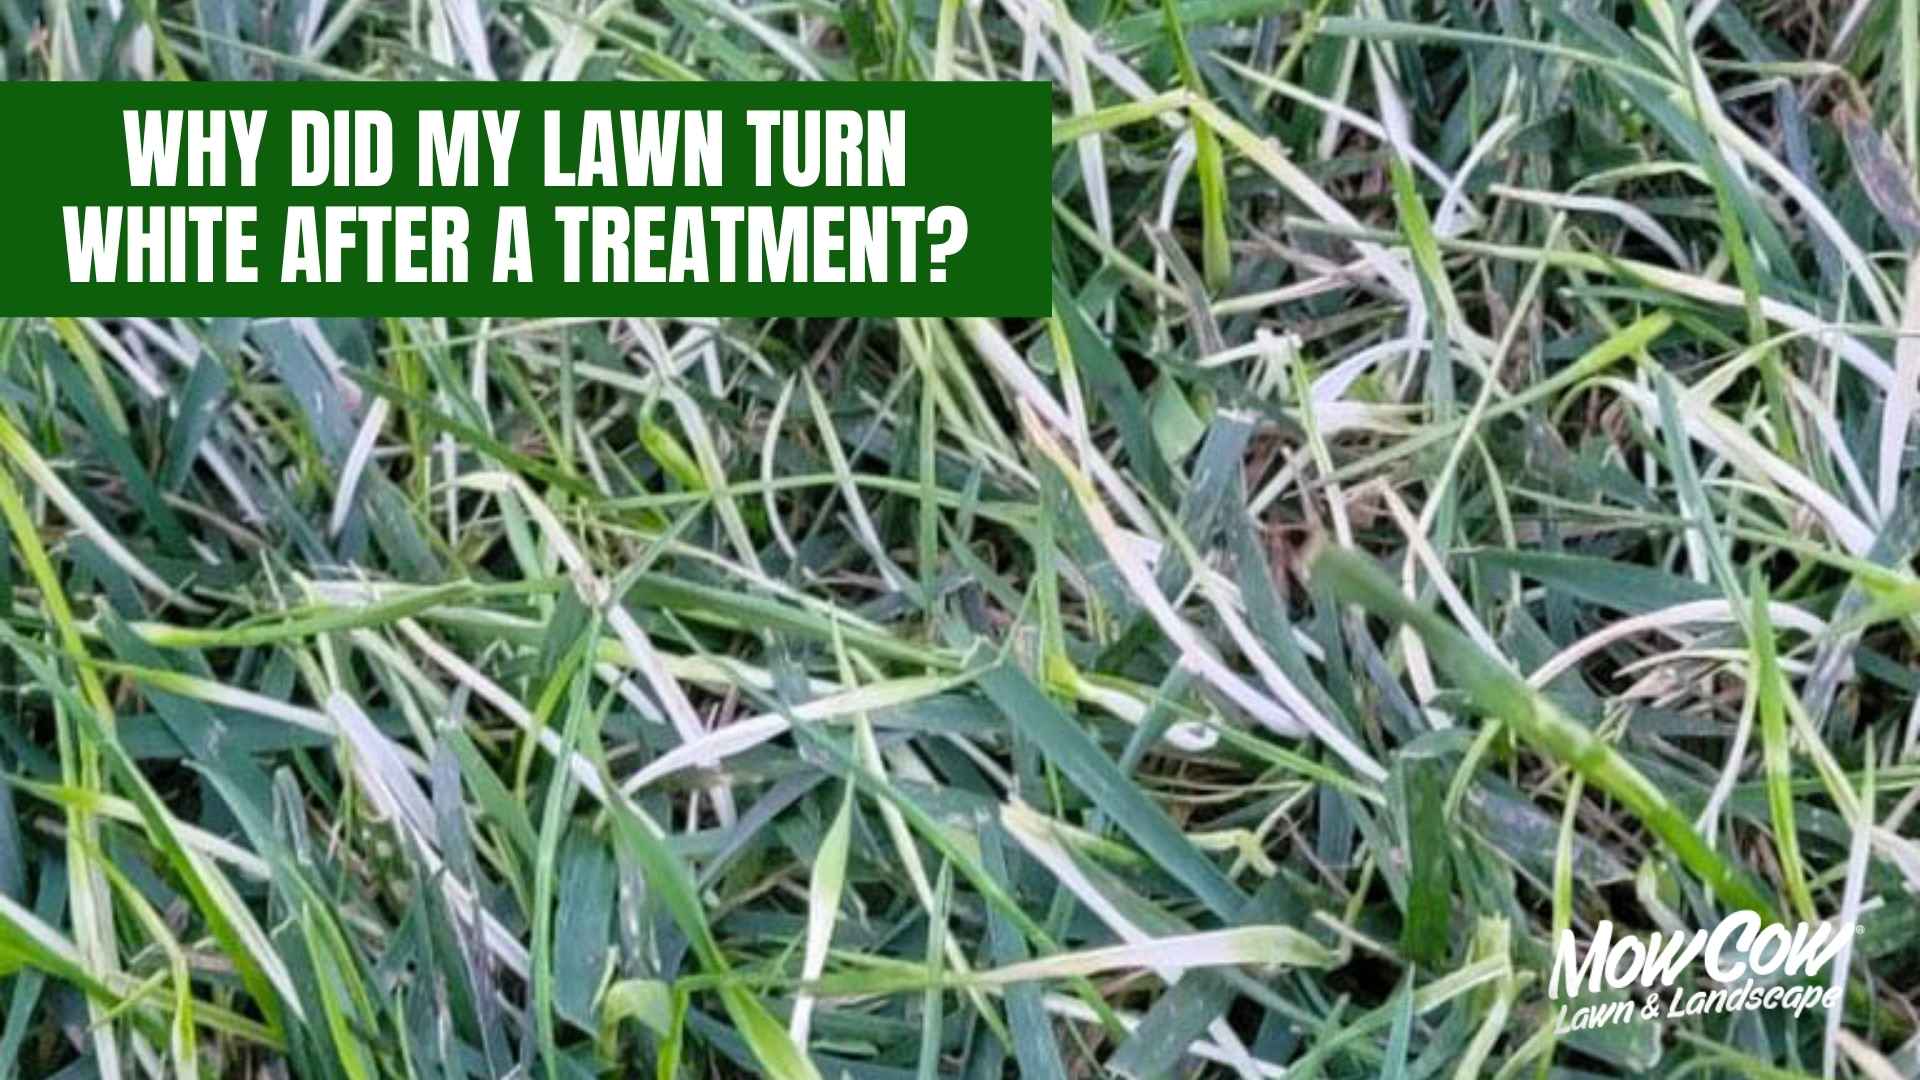 Why did my lawn turn white after a treatment